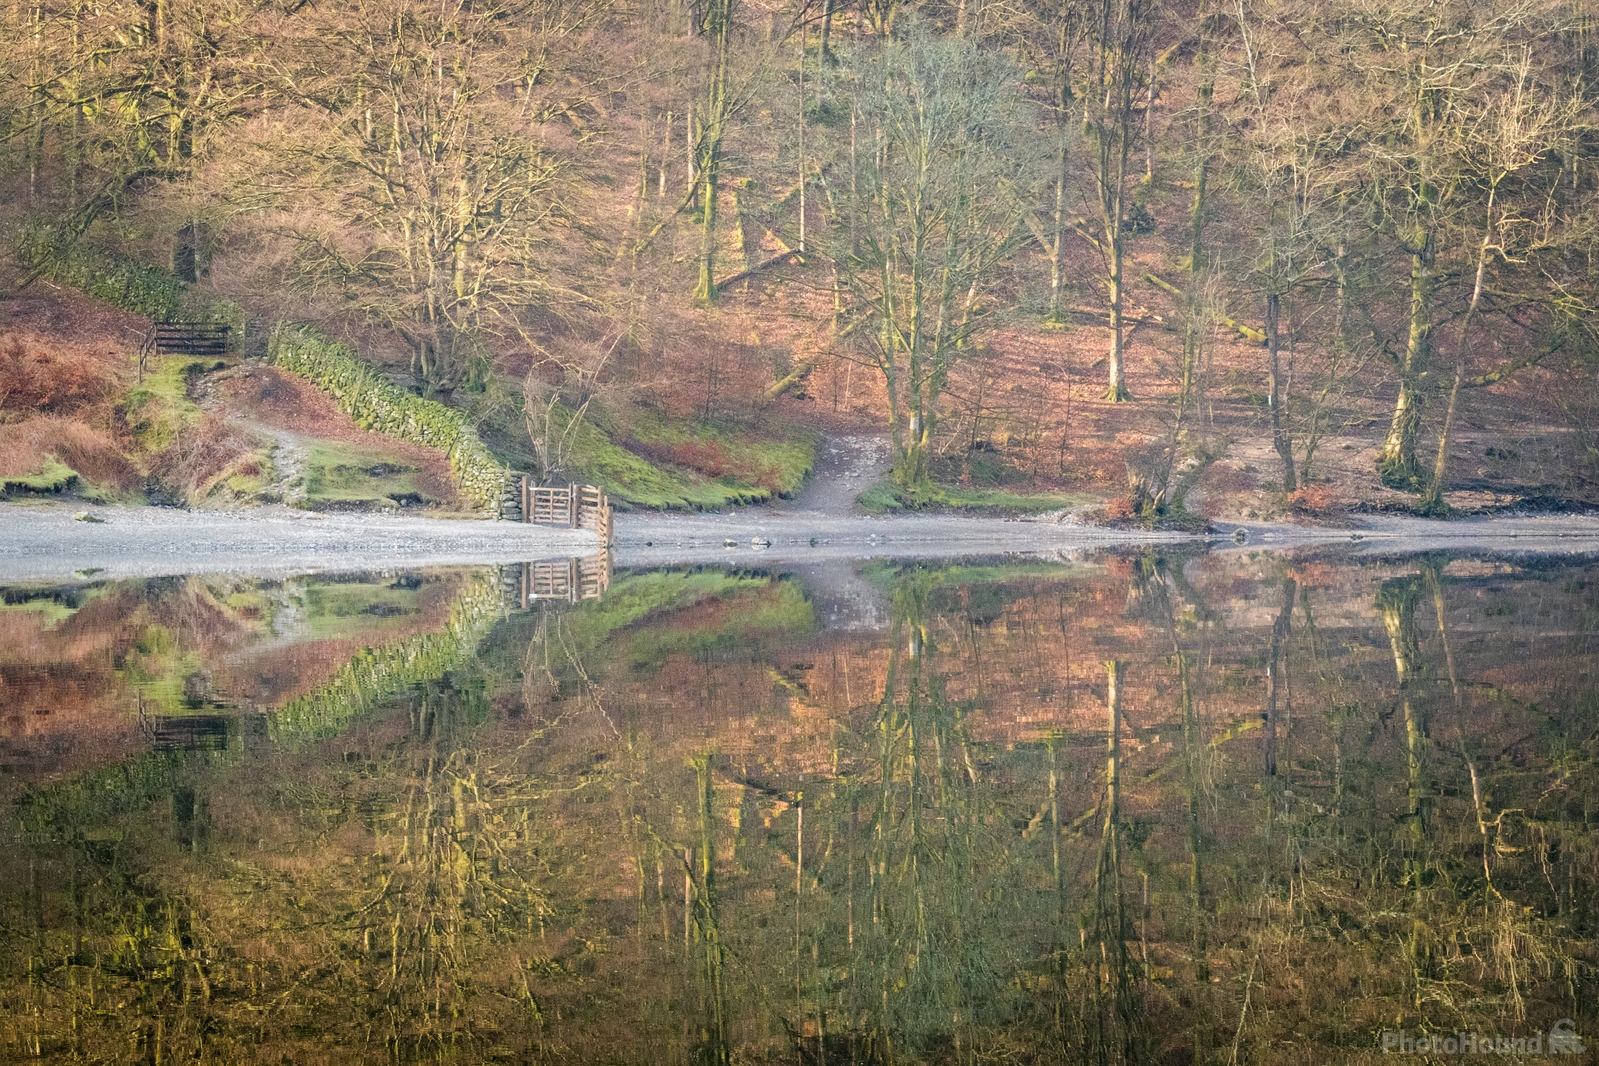 Image of Grasmere View, Lake district by Andy Killingbeck